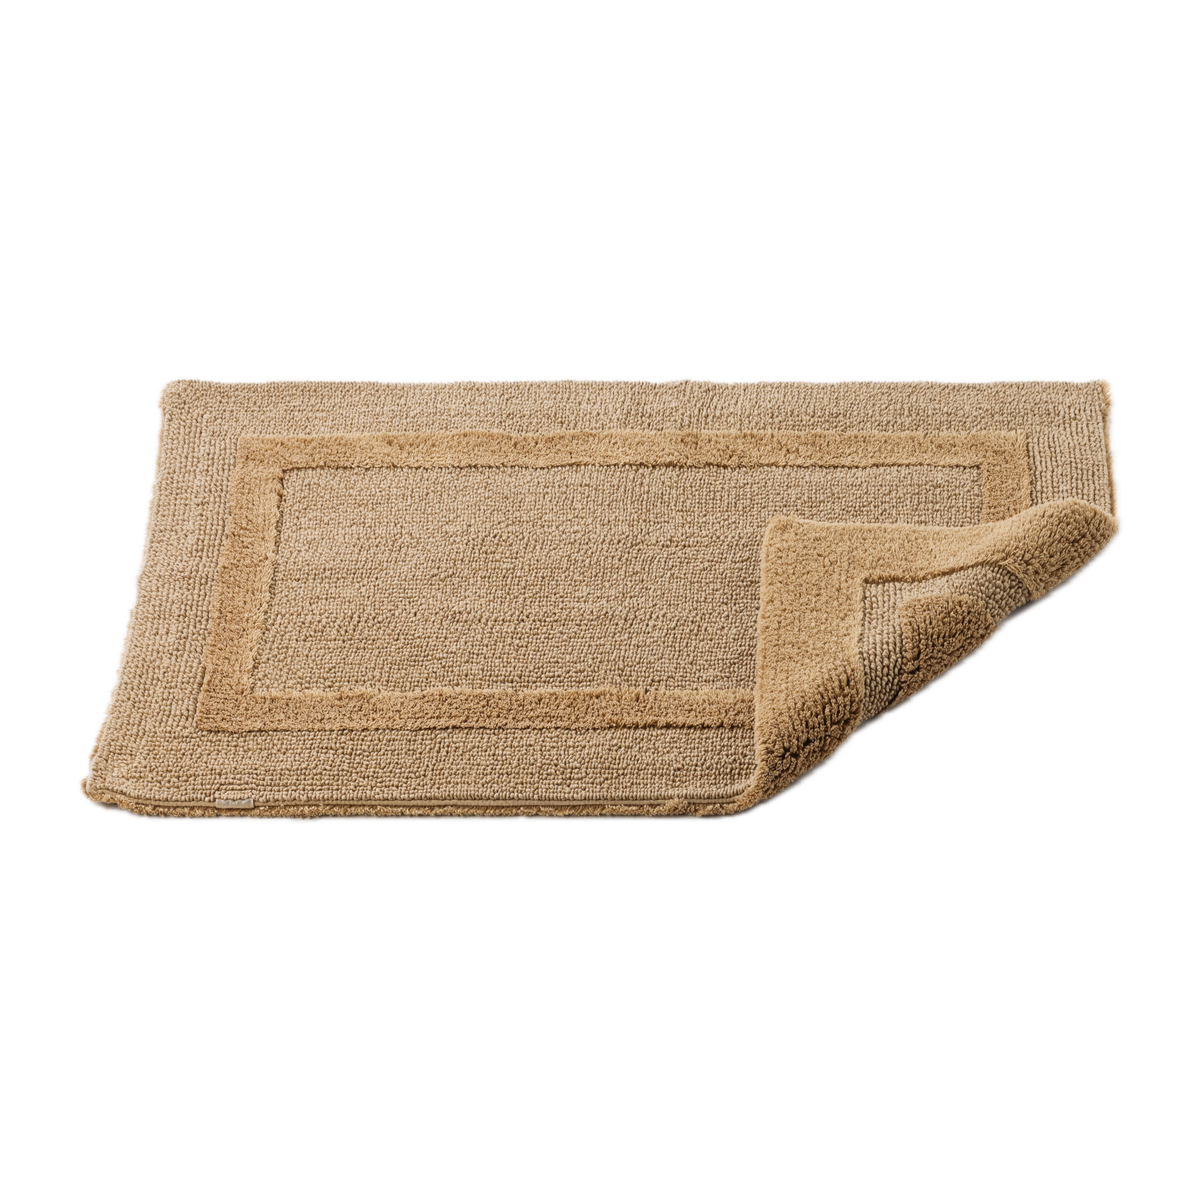 Abyss Habidecor Reversible Bath Rug in Croissant Color with Corner Fold